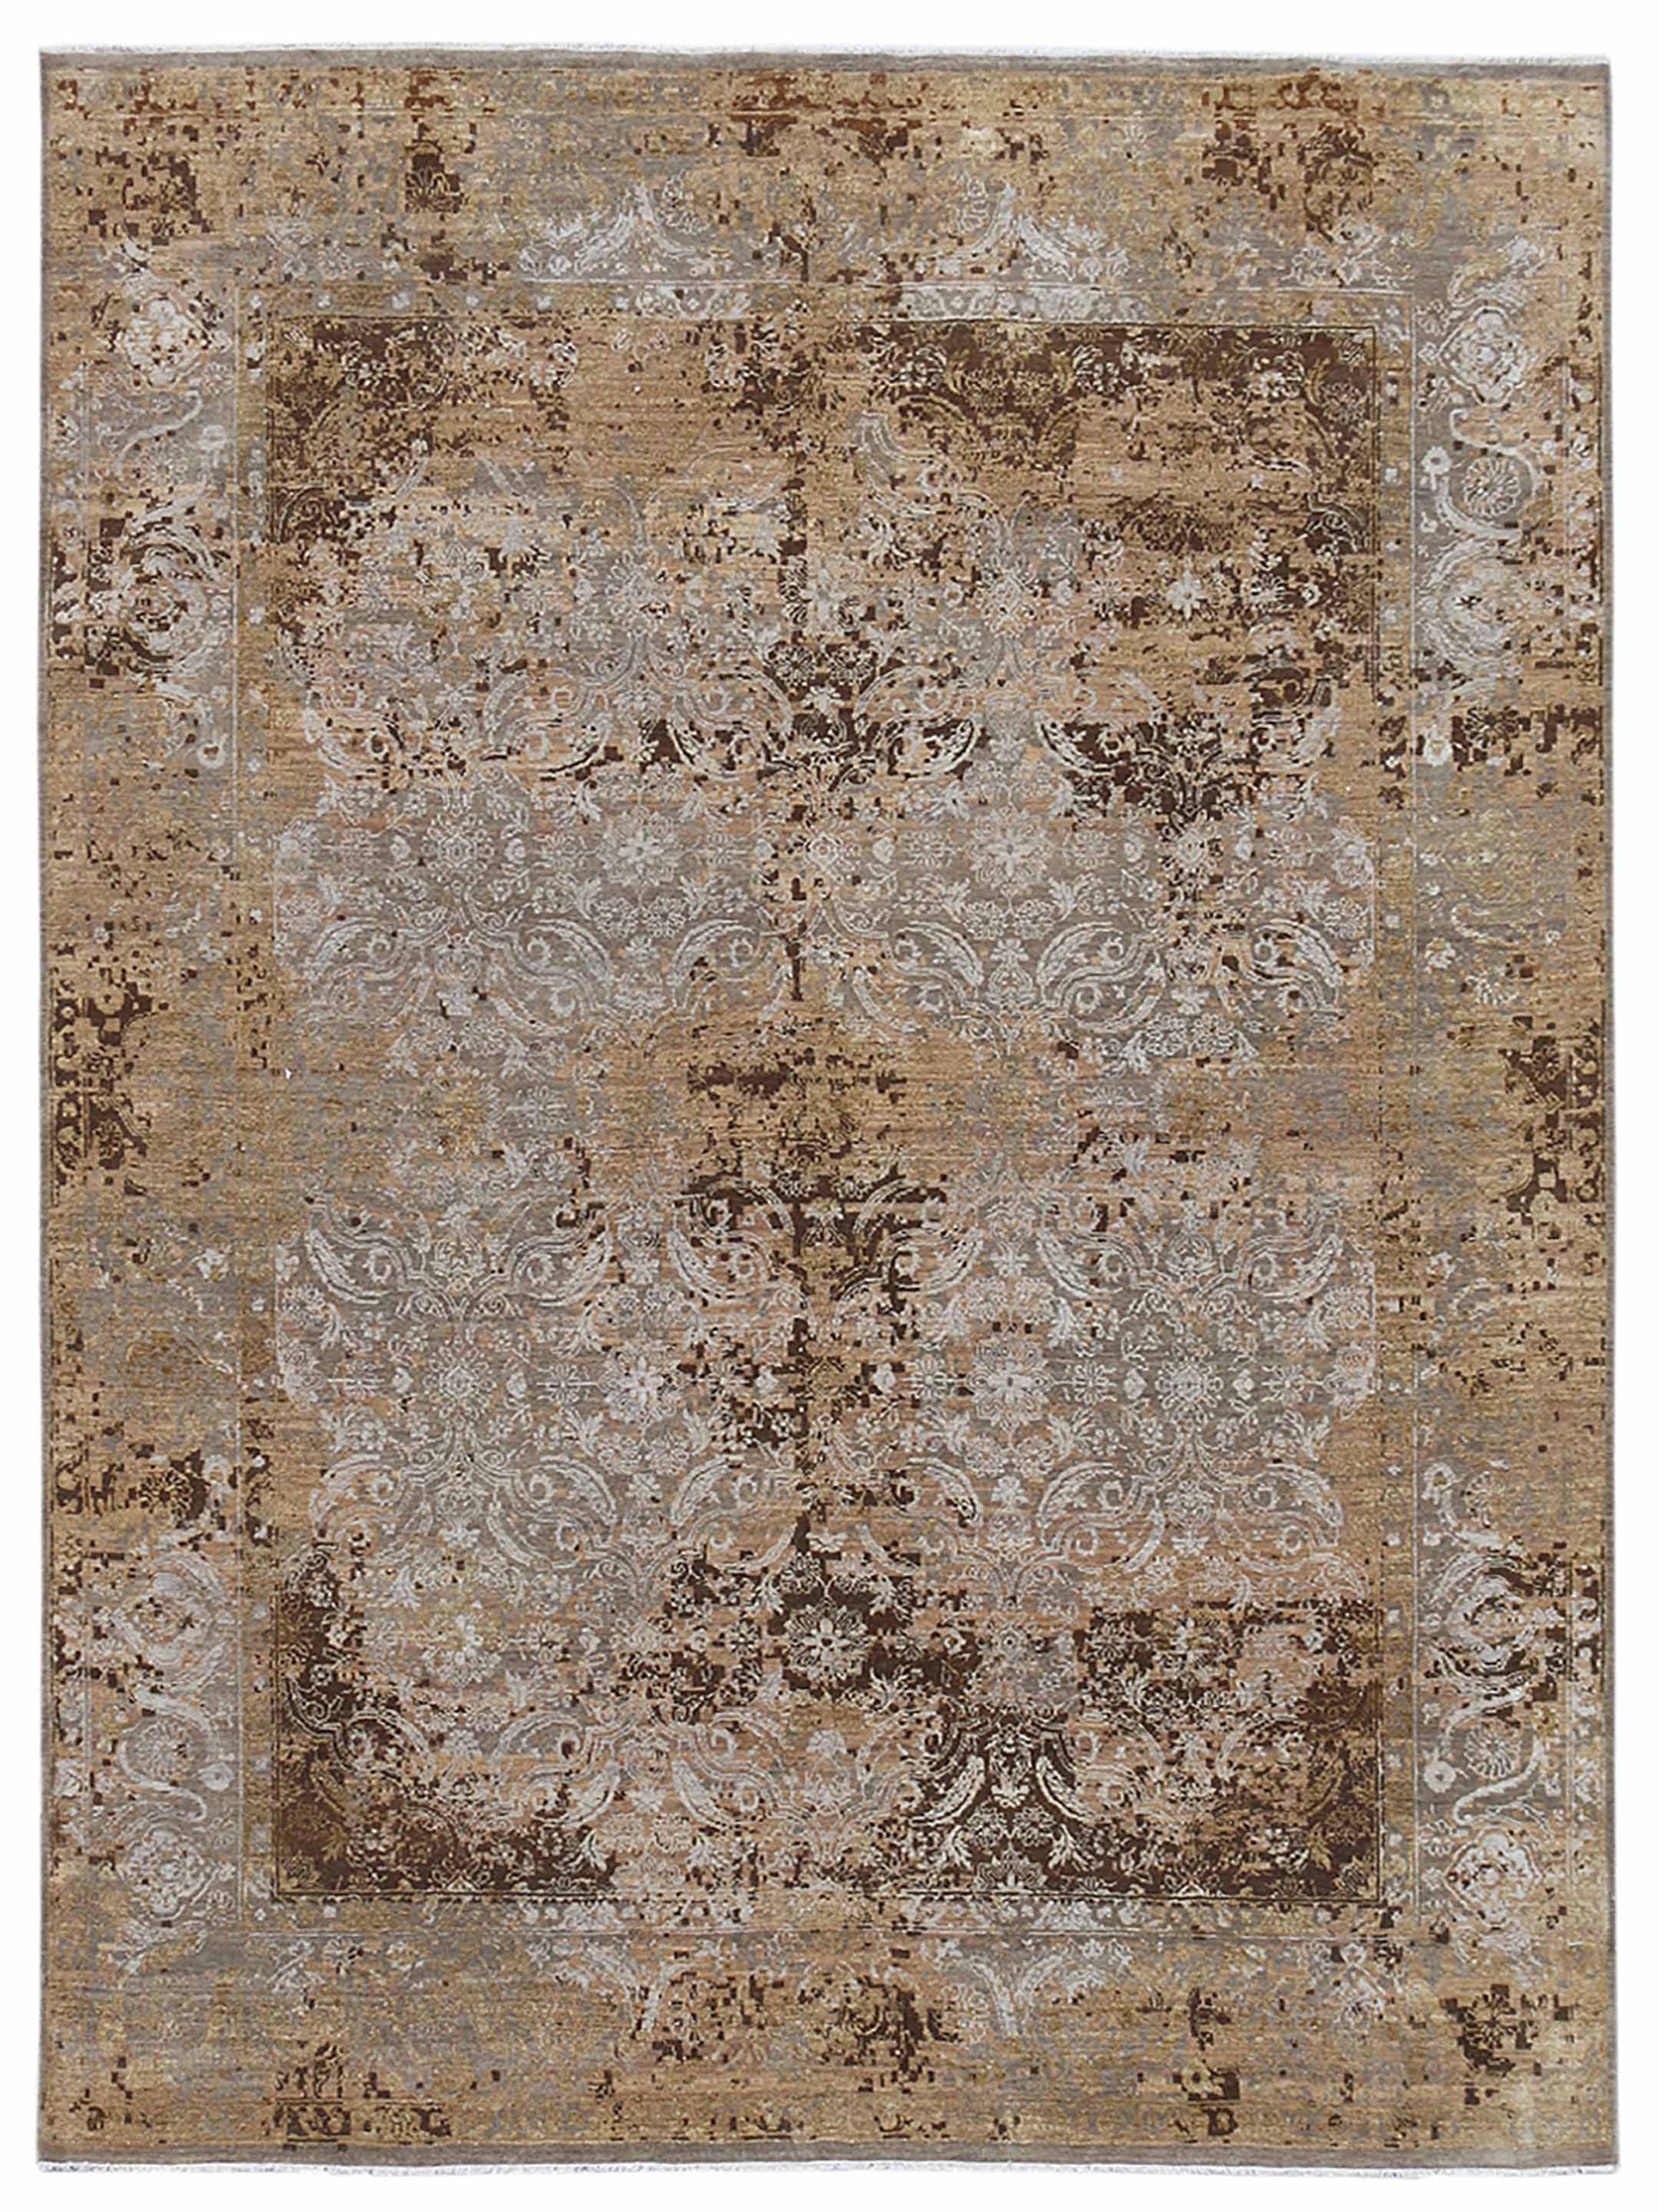 Limited PARKES PA-556 Peach Transitional Knotted Rug